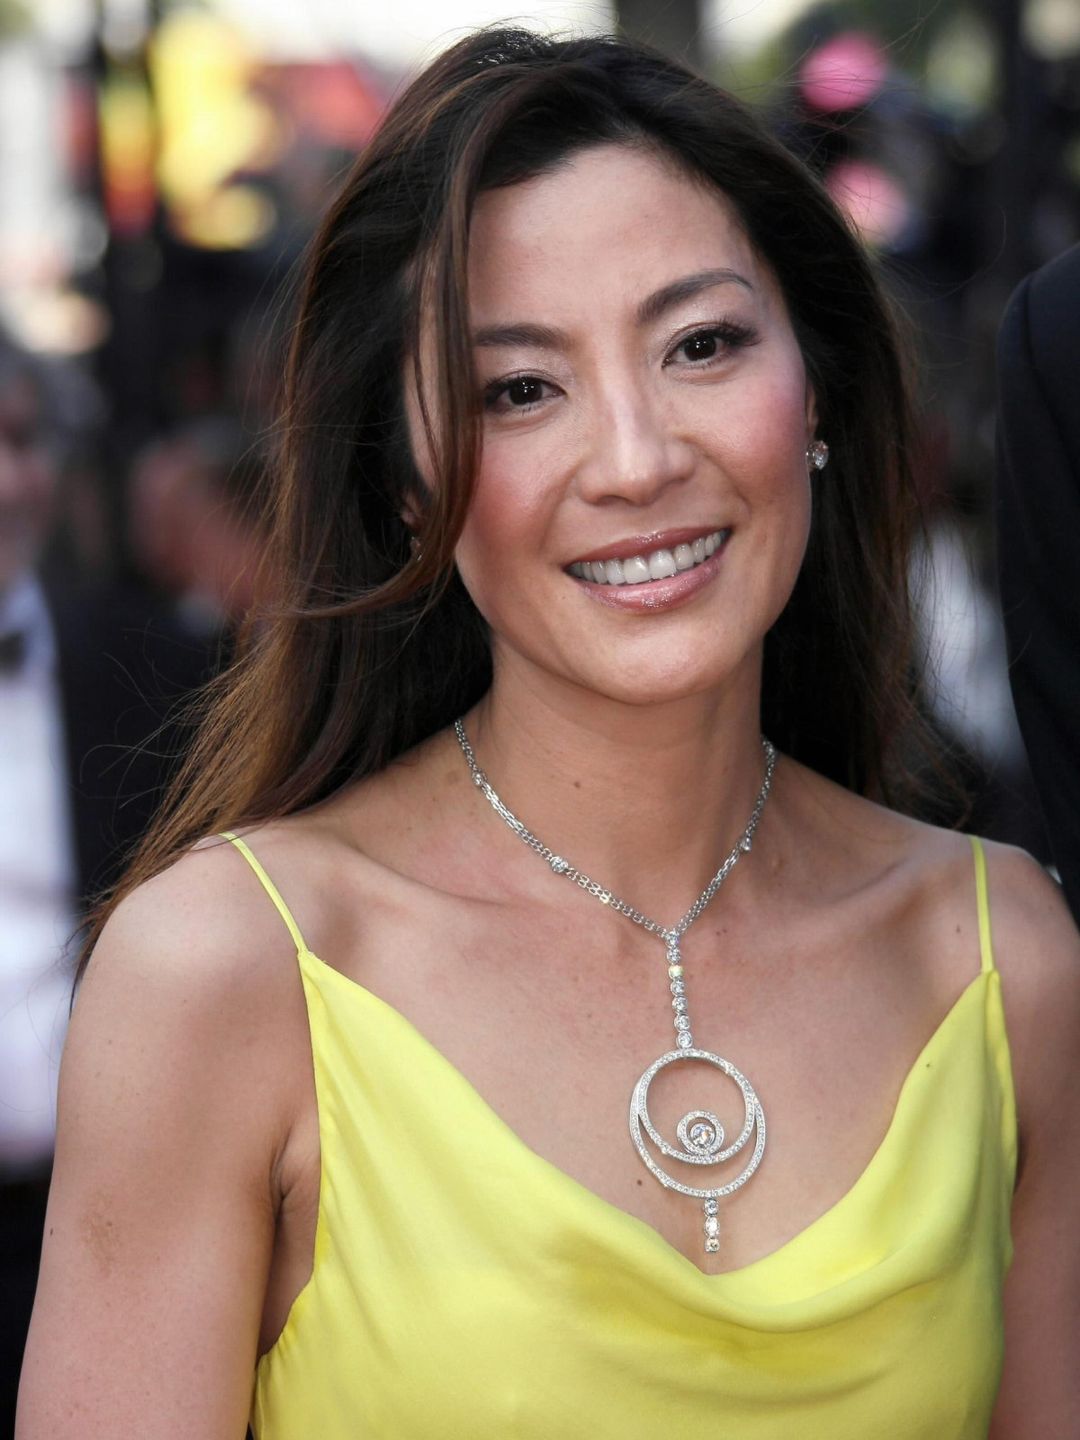 Michelle Yeoh young age